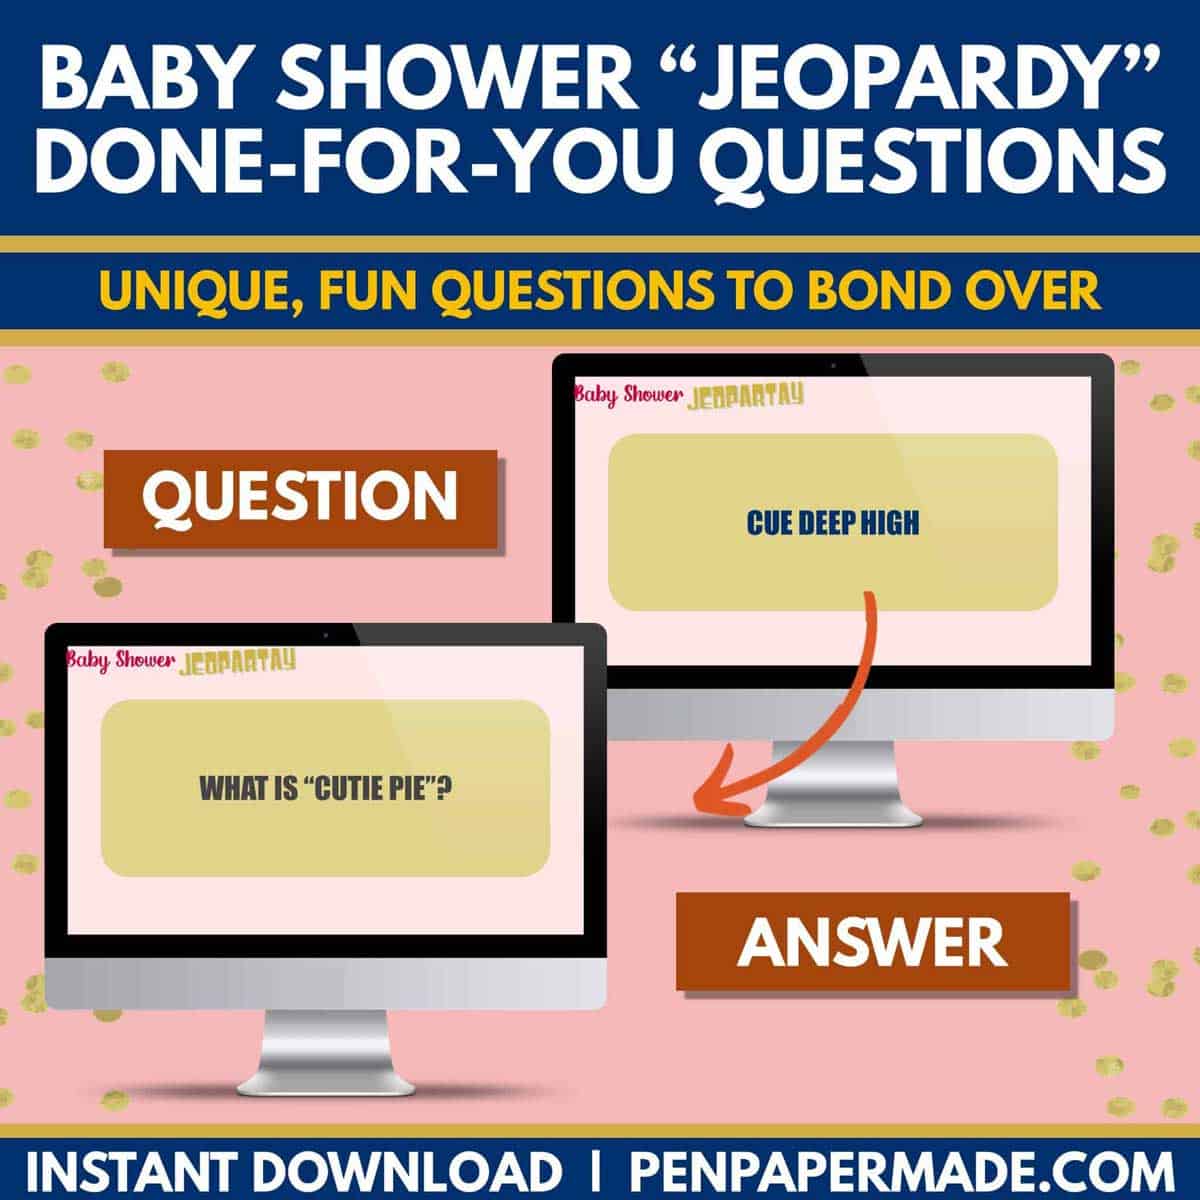 fun pink baby shower jeopardy questions like what does cue deep high sound like?